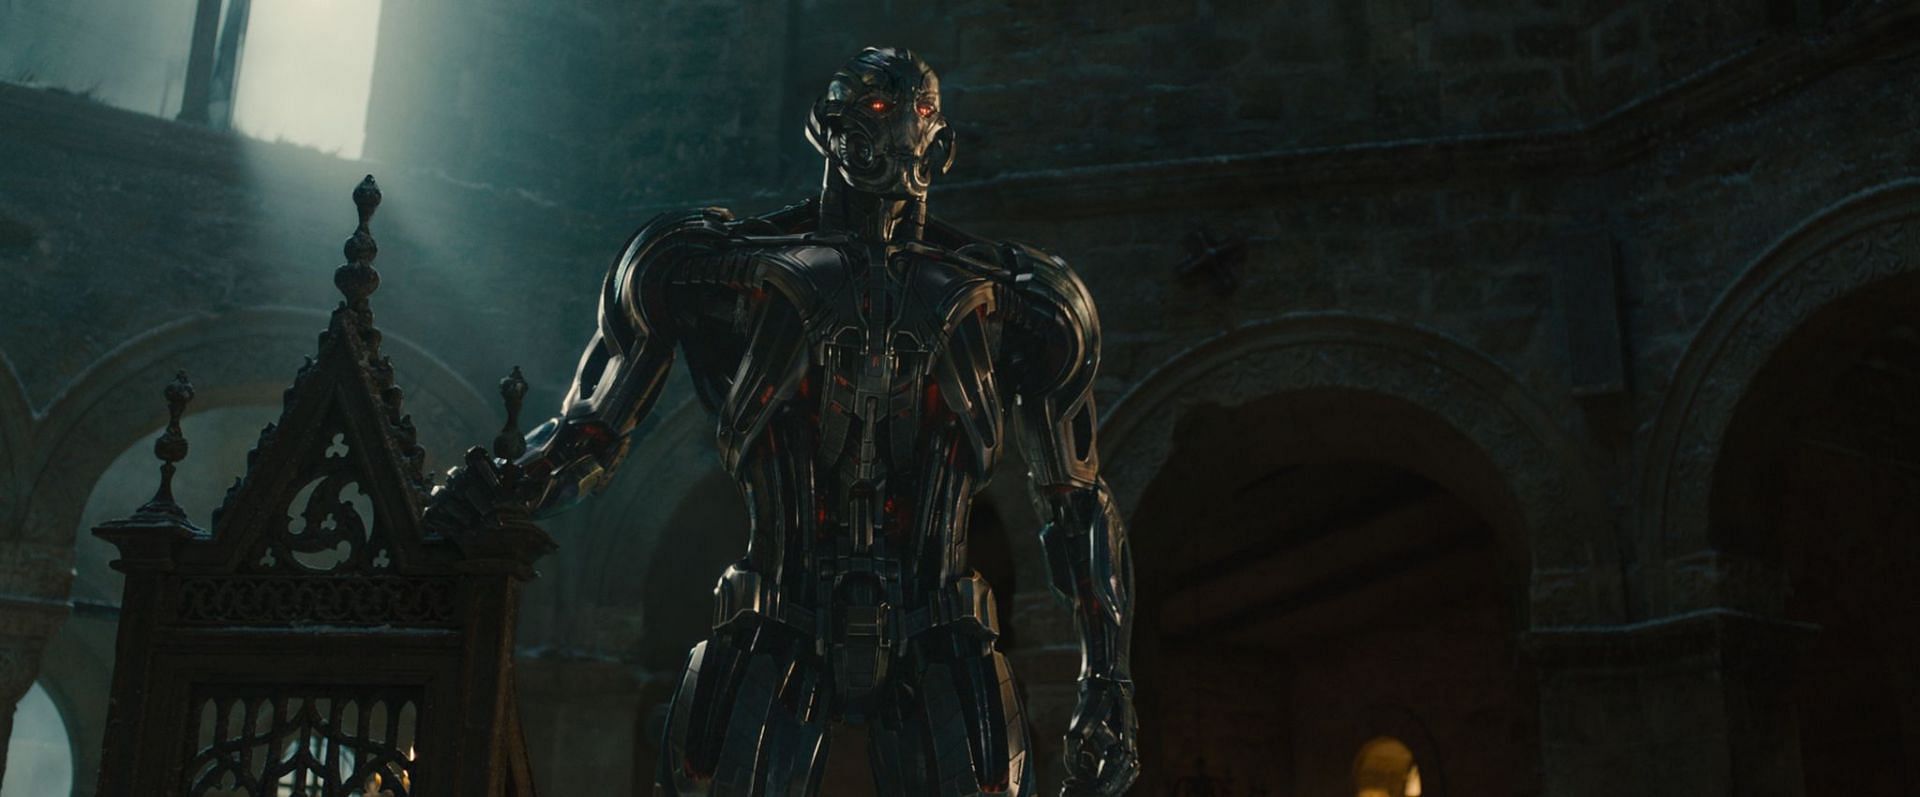 The movie&#039;s villain, Ultron, played by James Spader, is one of the most memorable villains in the MCU (Image via Marvel Studios)